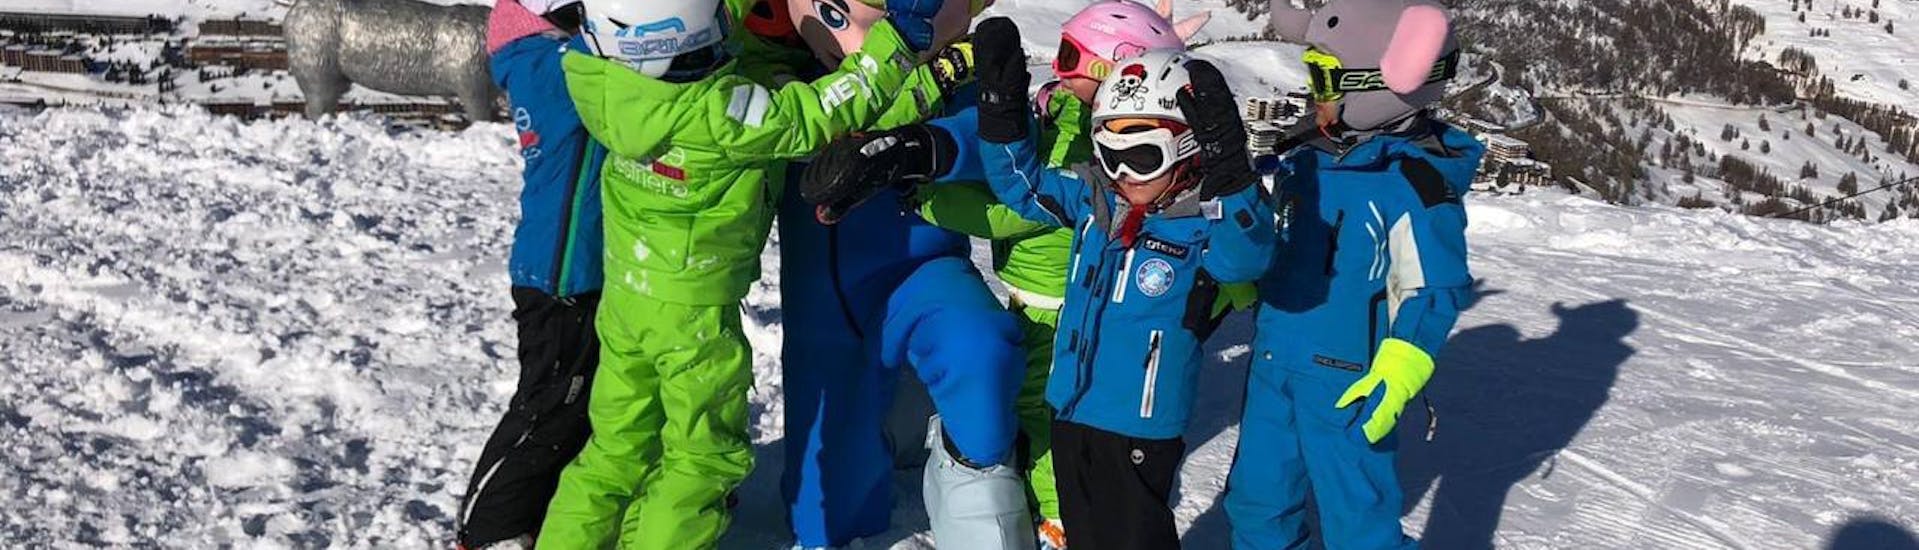 Kids cheering with the mascotte of their Kids Snowboarding Lessons (4-8 y.) for First Timers with Scuola Sci Vialattea Sauze d'Olux.